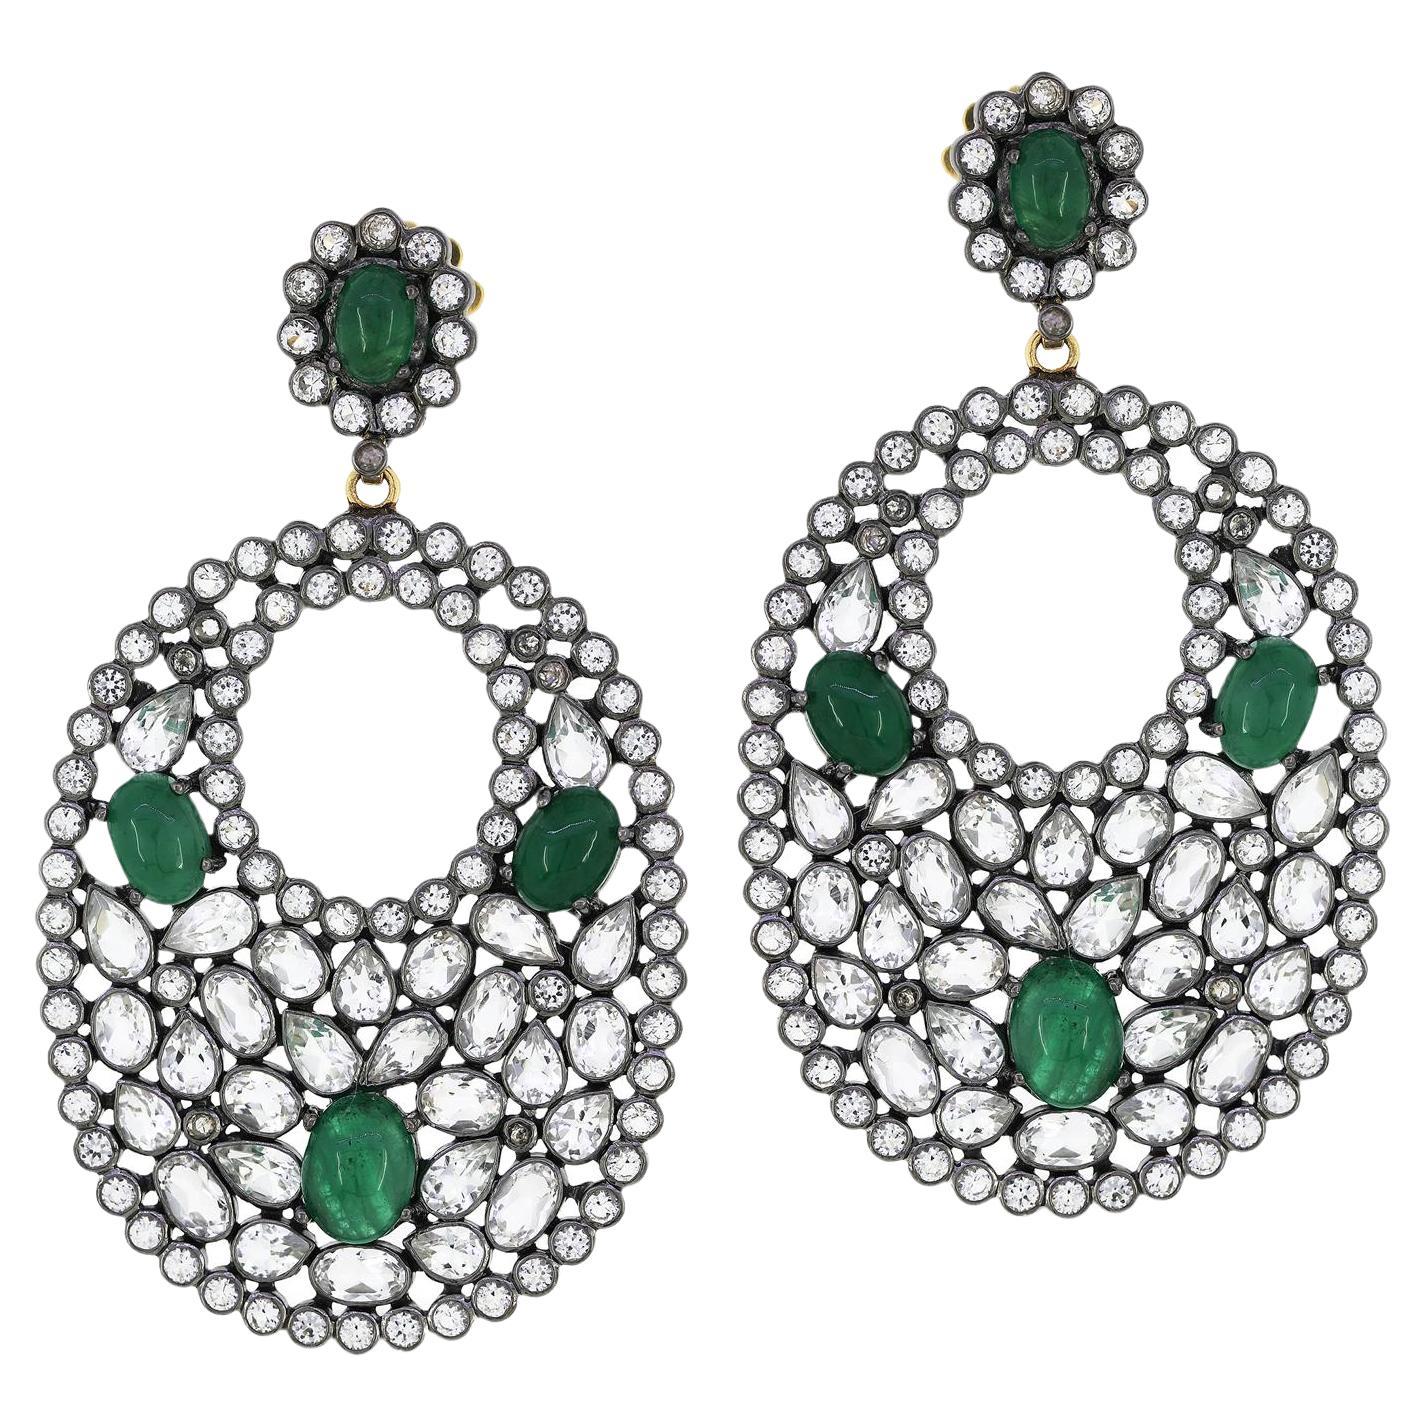 Victorian 27.2cttw White Topaz, Emerald and Diamond Drop Earrings in 18/925